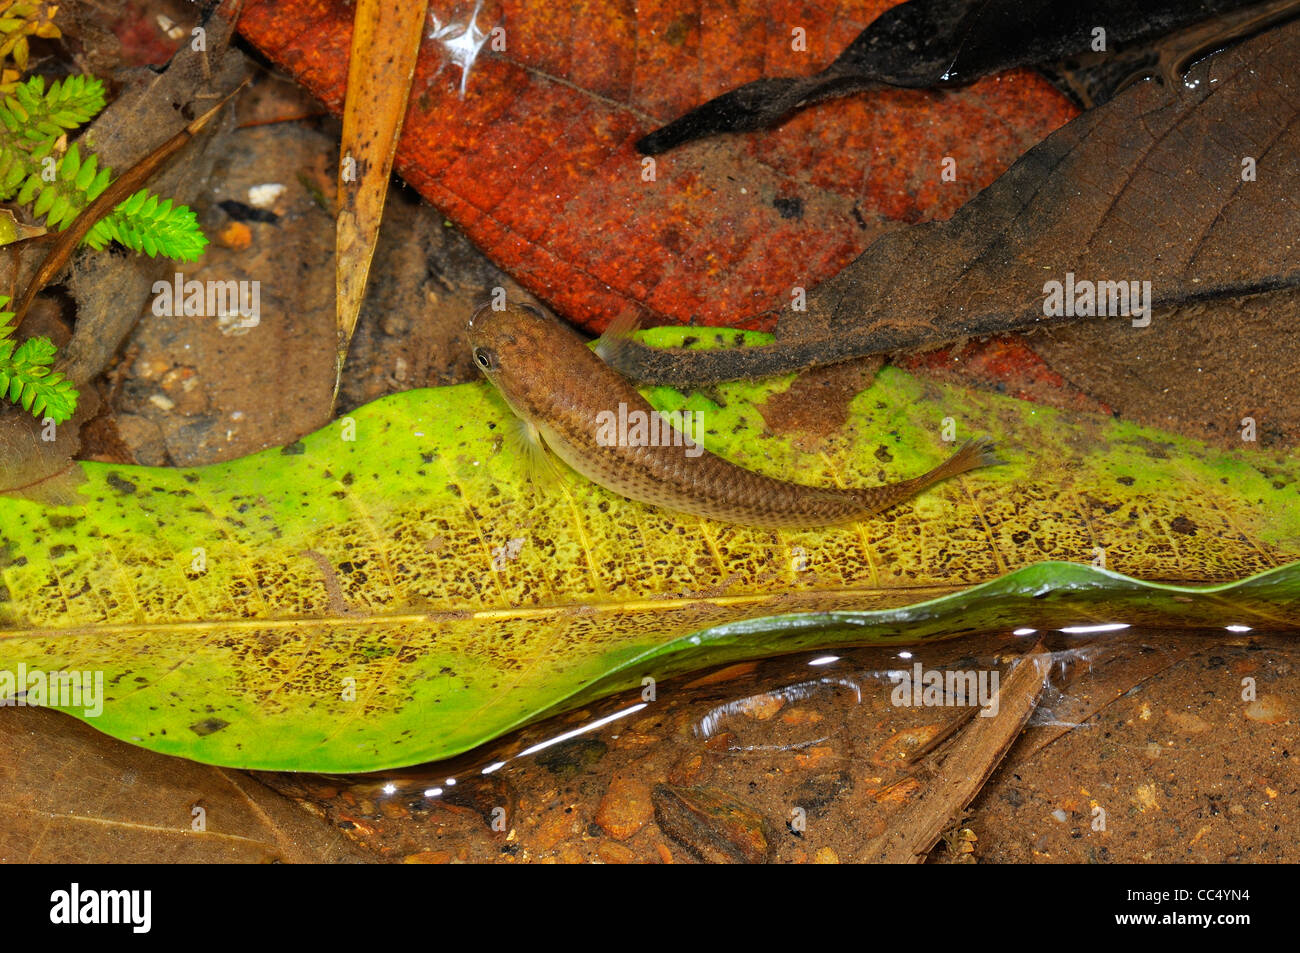 Hart's Rivulus or Jumping Guabine (Rivulus hartii) swimming amongst fallen leaves in shallow mountain stream, Trinidad Stock Photo